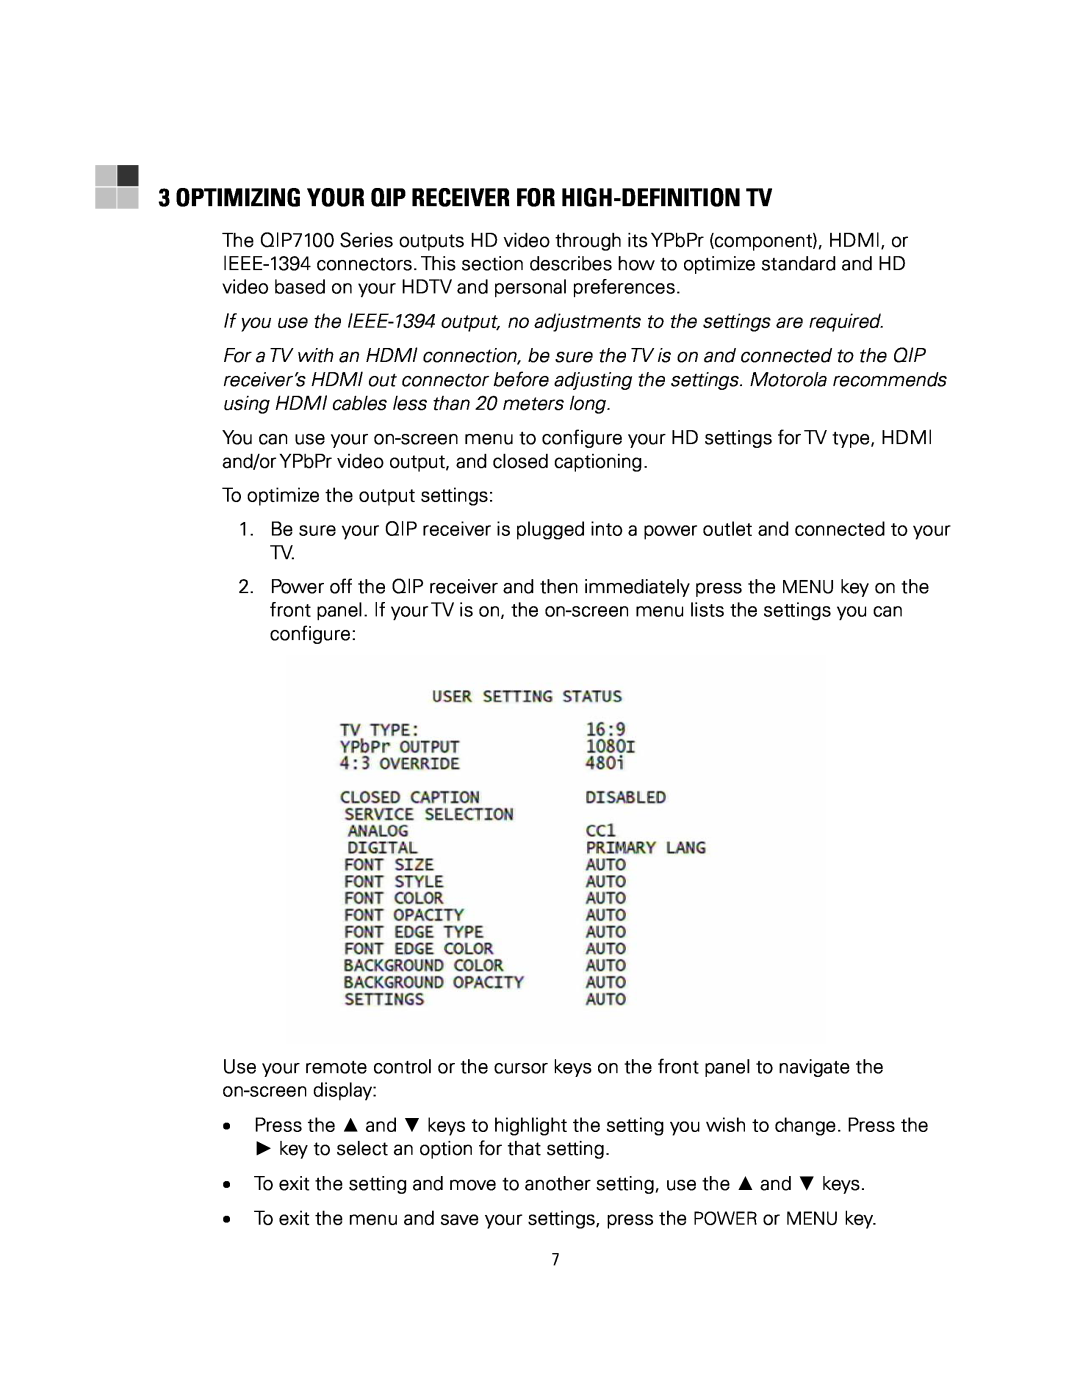 Motorola QIP7100 operation manual Optimizing Your Qip Receiver For High-Definition Tv 